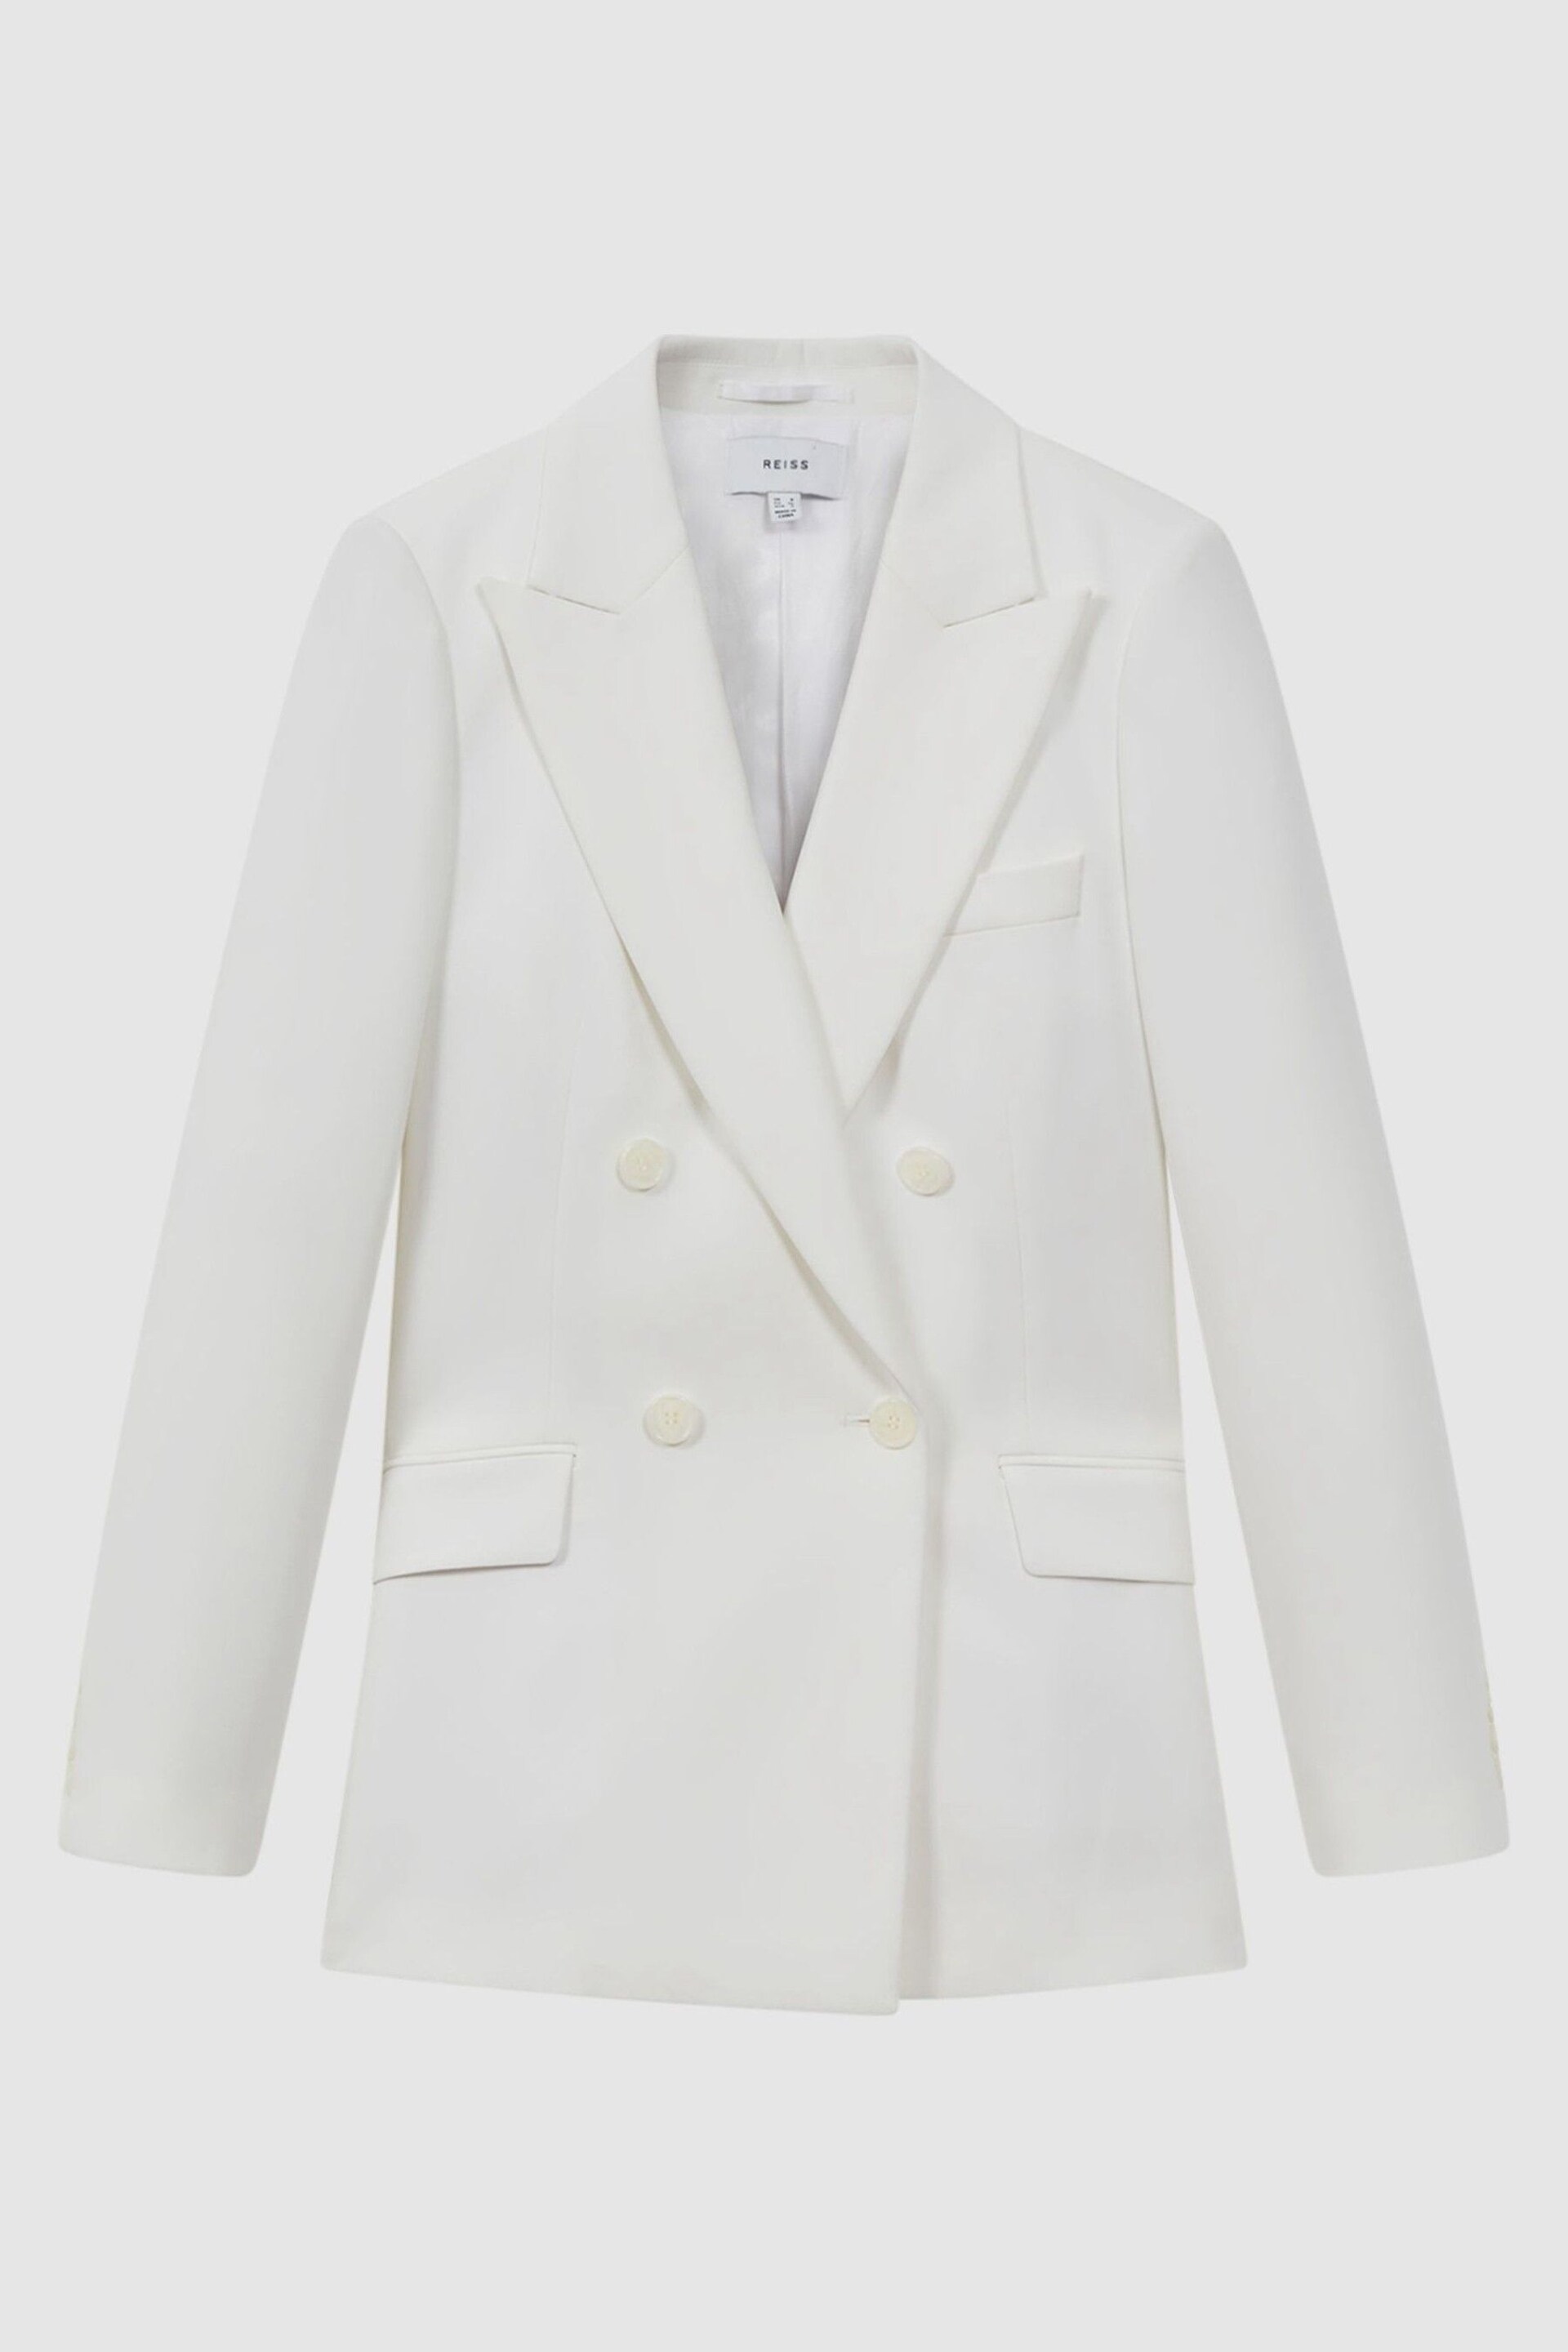 Reiss White Sienna Petite Double Breasted Crepe Suit Blazer - Image 2 of 8